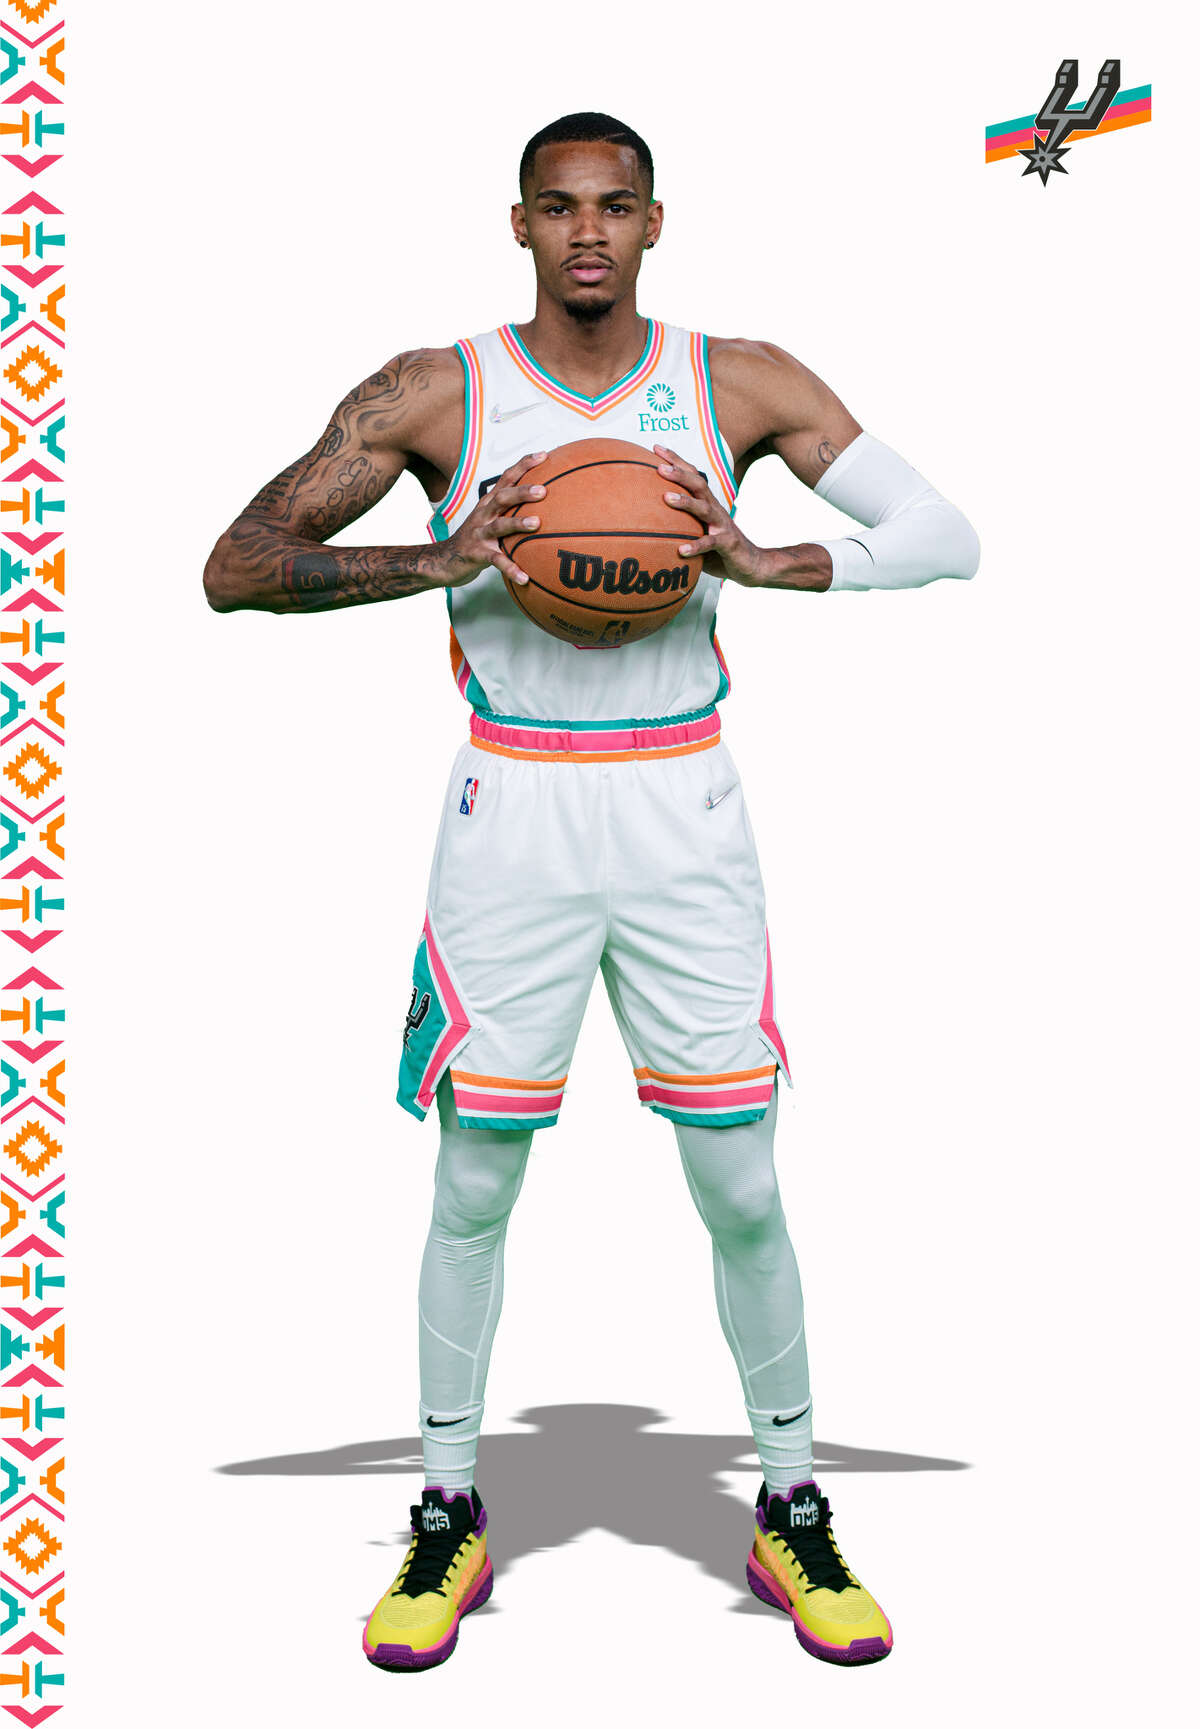 Spurs unveil Fiesta-themed City Edition uniforms to debut on